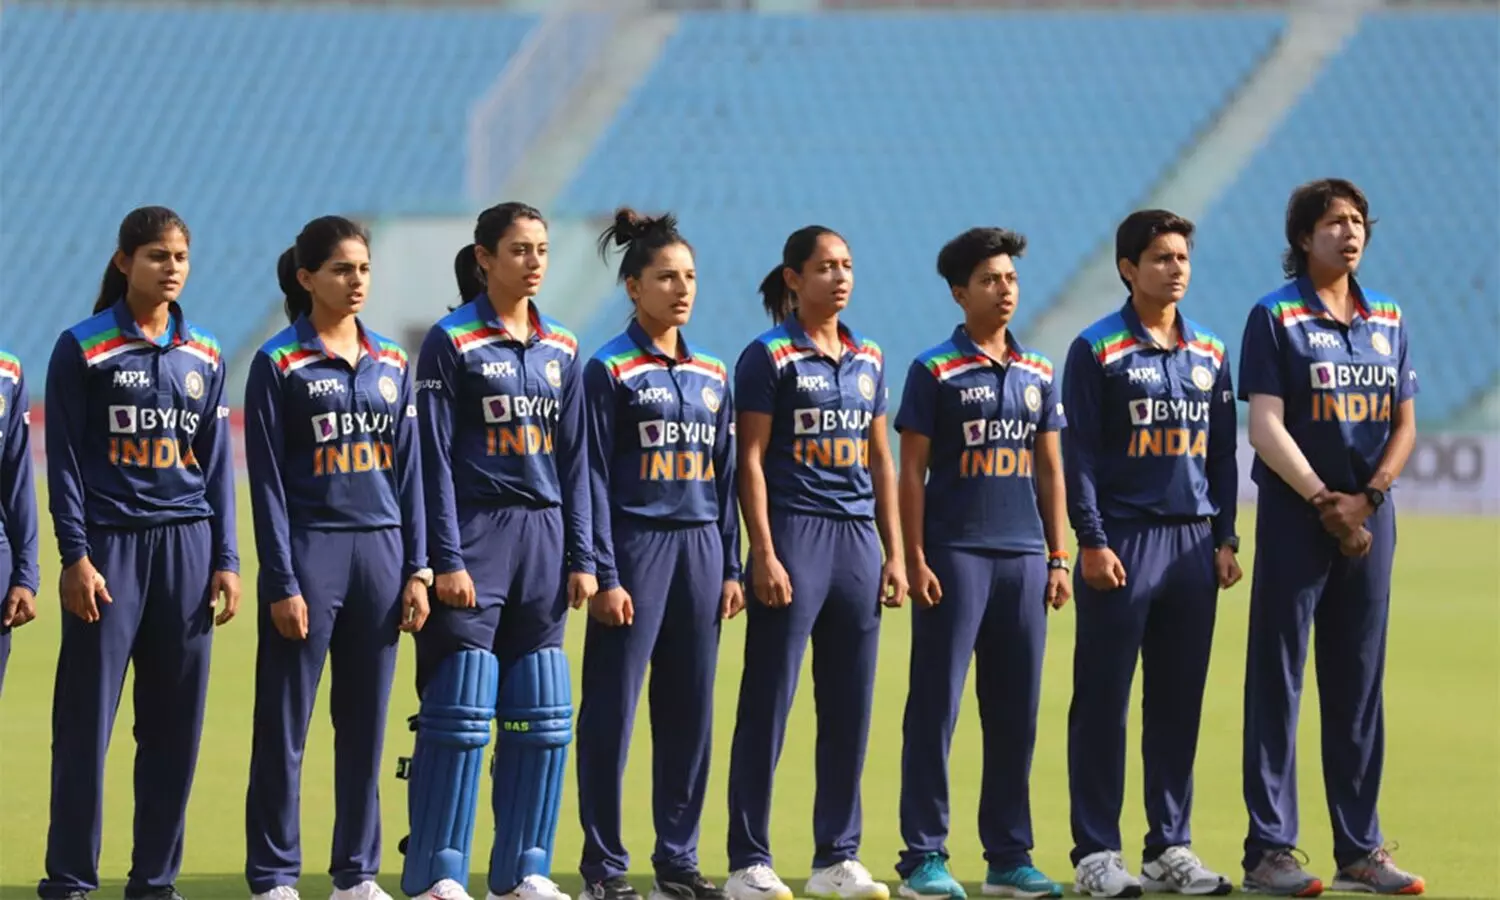 Indian Government Gifts Cricket Kit To Nepali National Team - YouTube